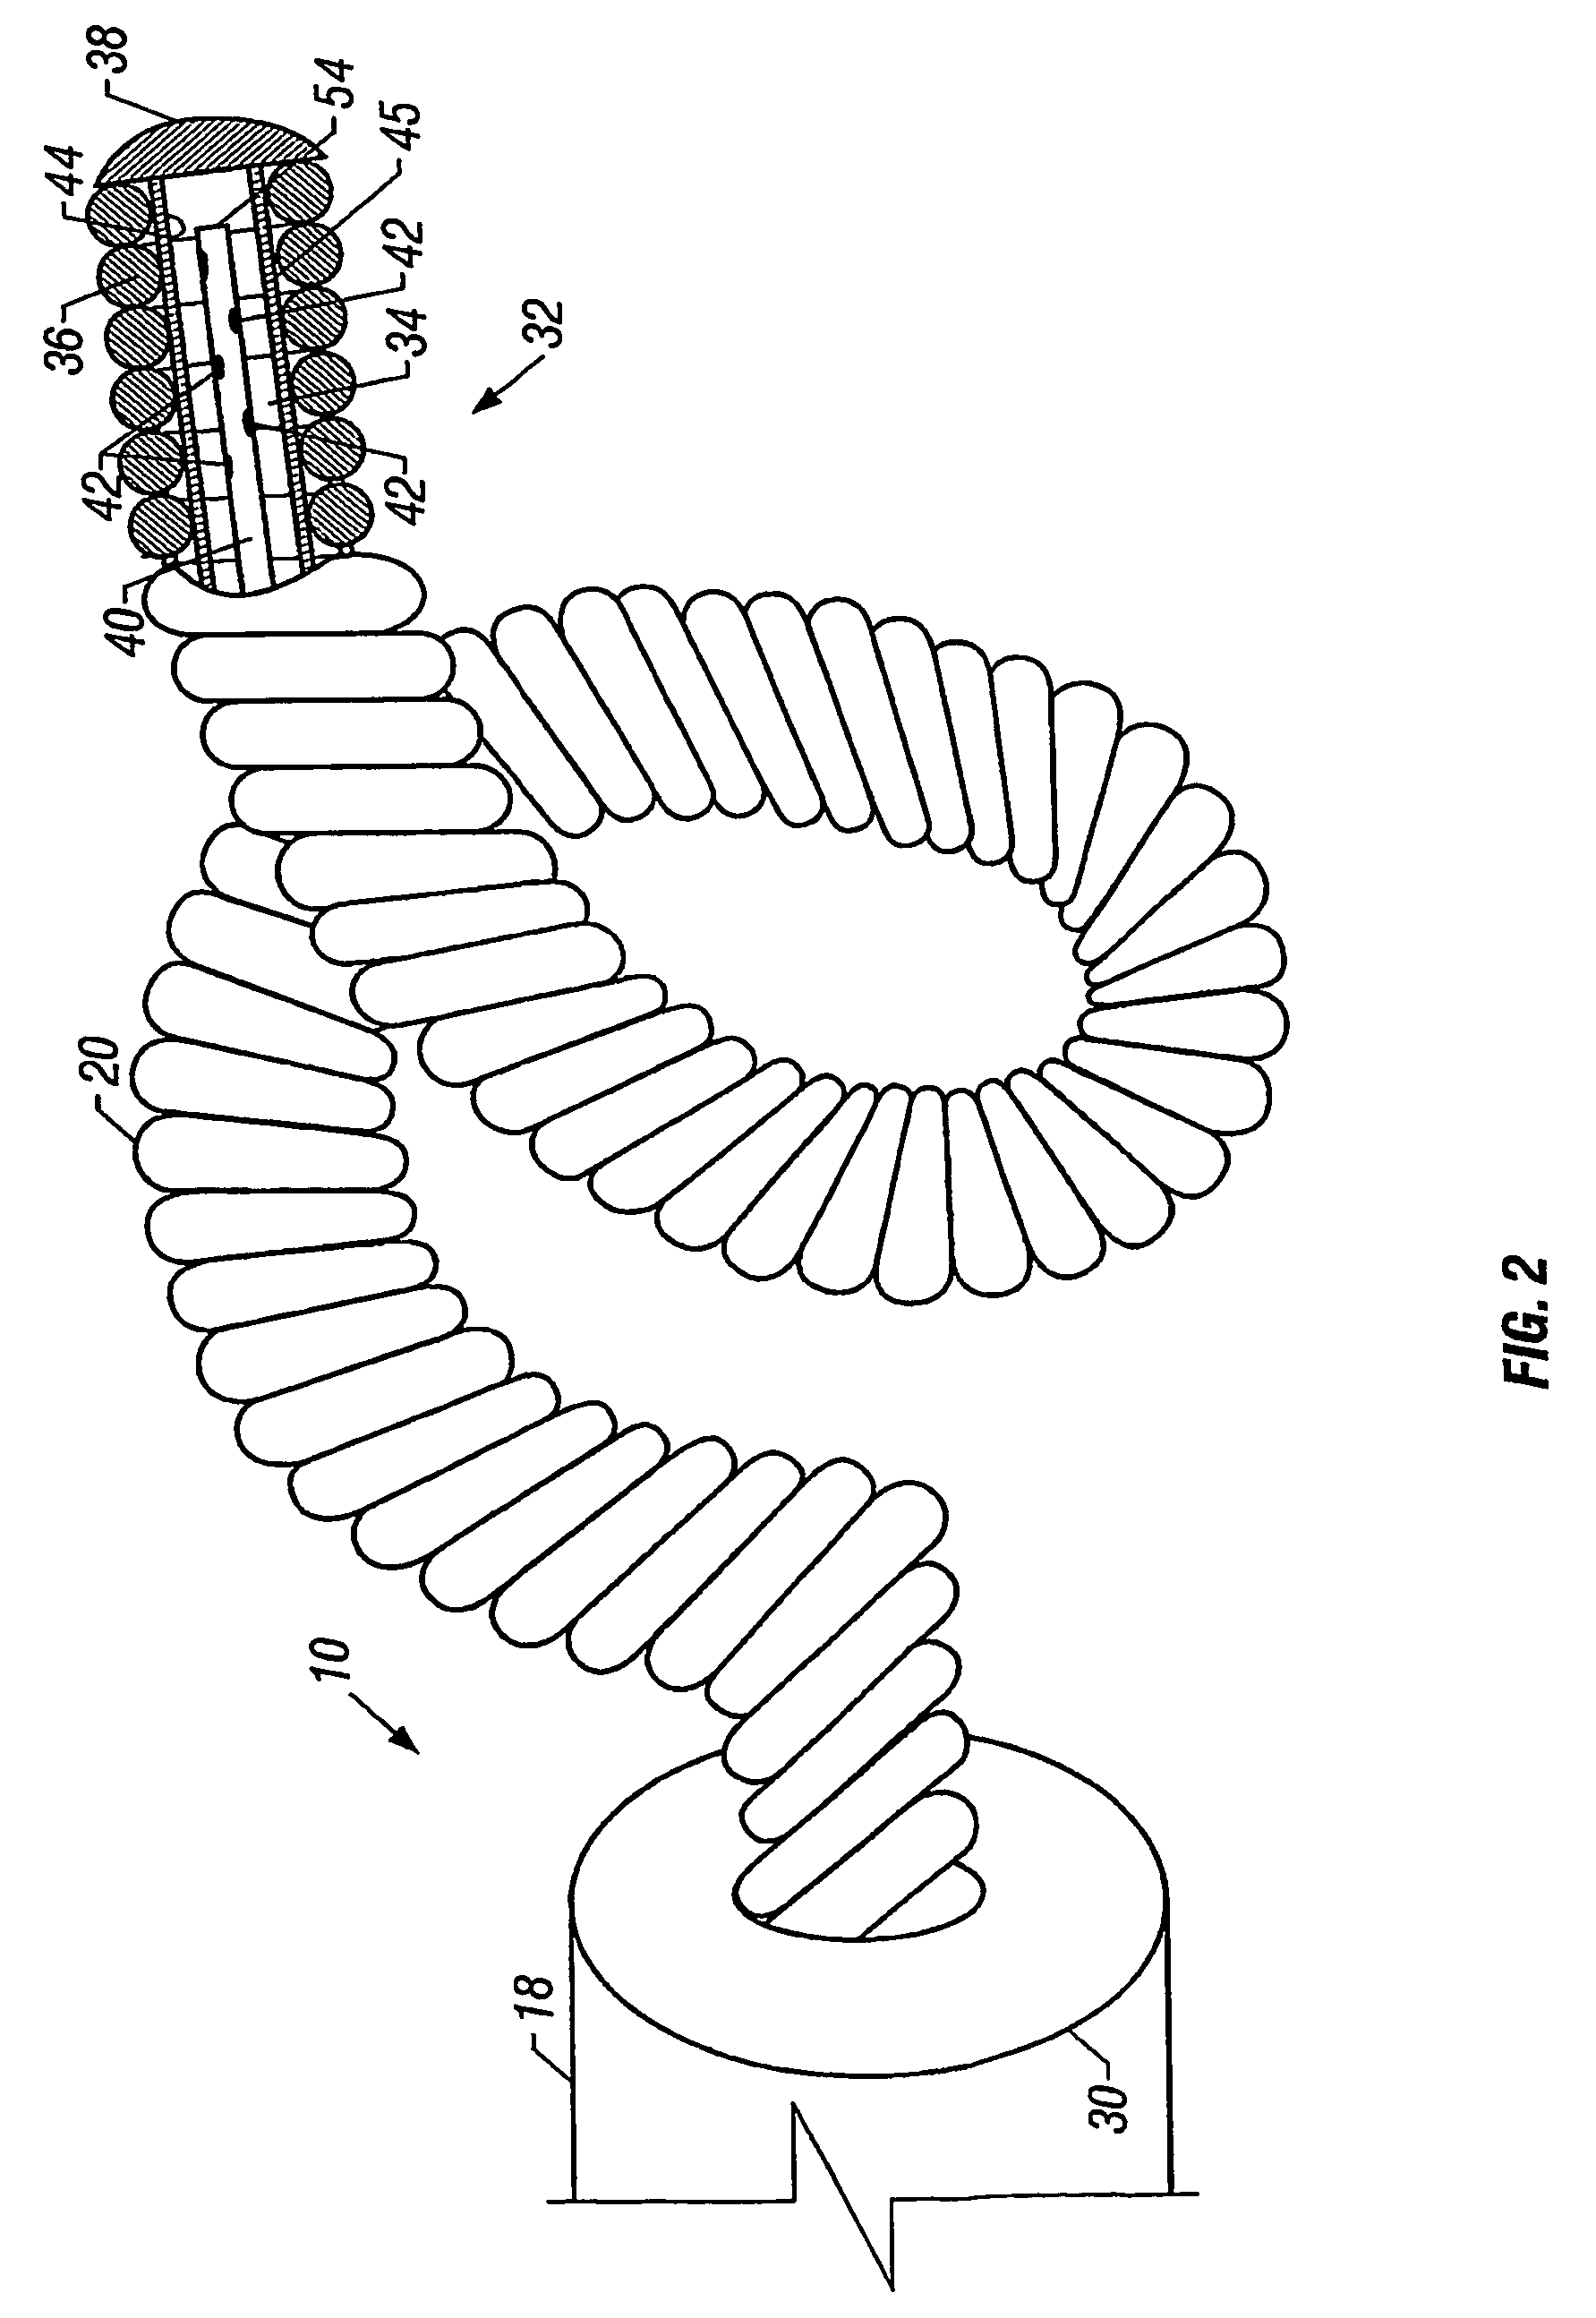 Methods and apparatus for cryo-therapy